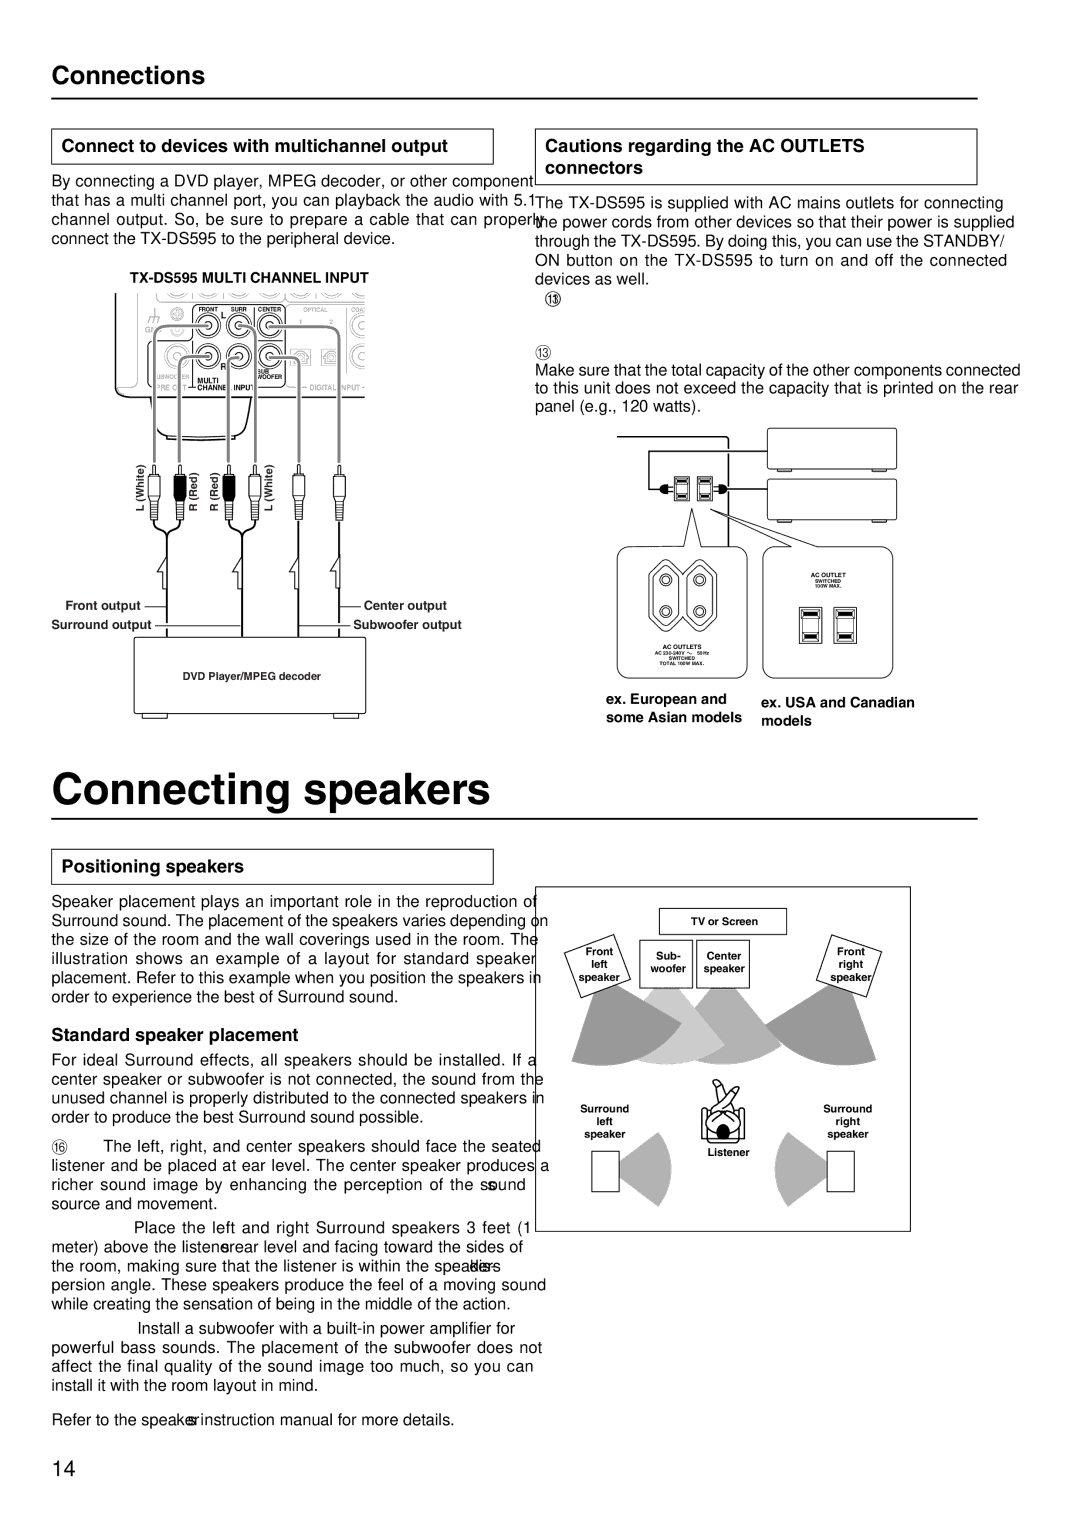 Onkyo TX-DS595 appendix Connecting speakers, Connect to devices with multichannel output, Positioning speakers 